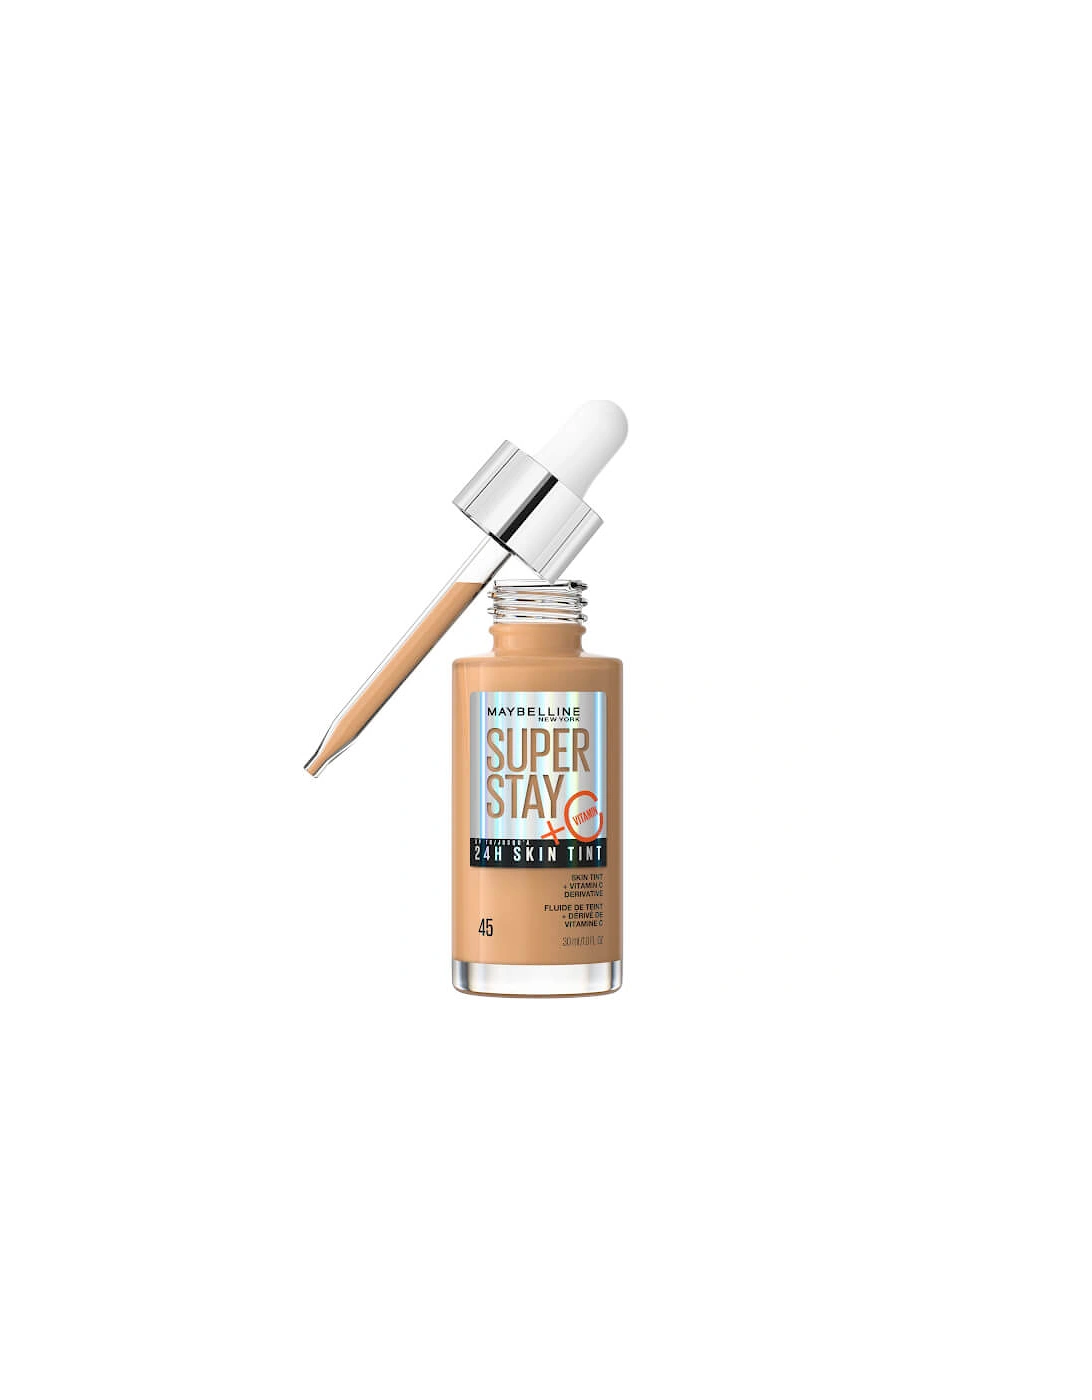 Super Stay up to 24H Skin Tint Foundation + Vitamin C - Shade 45, 2 of 1